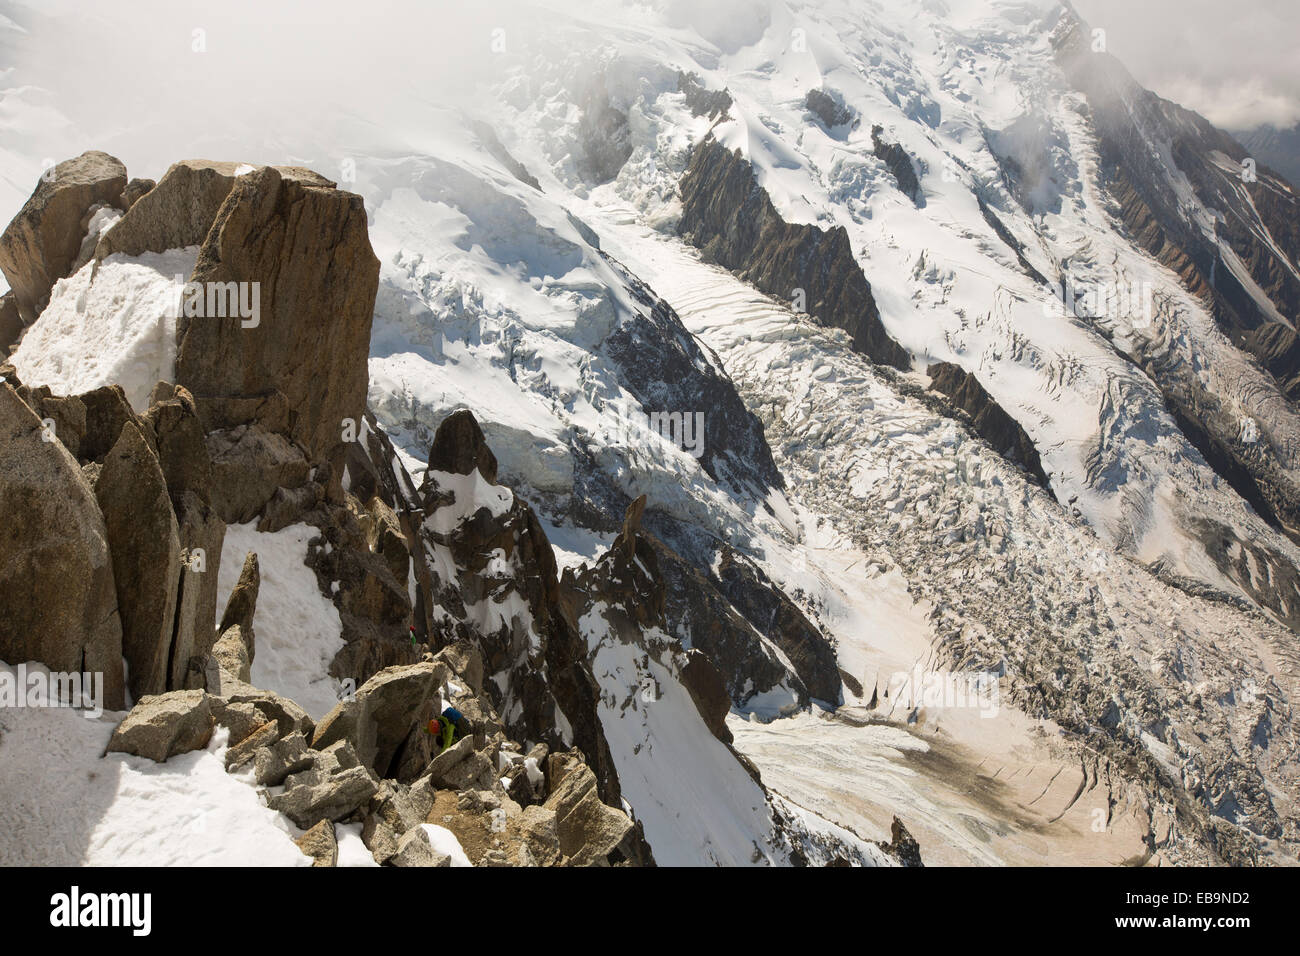 Mont Blanc from the Aiguille Du Midi above Chamonix, France, with climbers on the Cosmiques Arete. Stock Photo